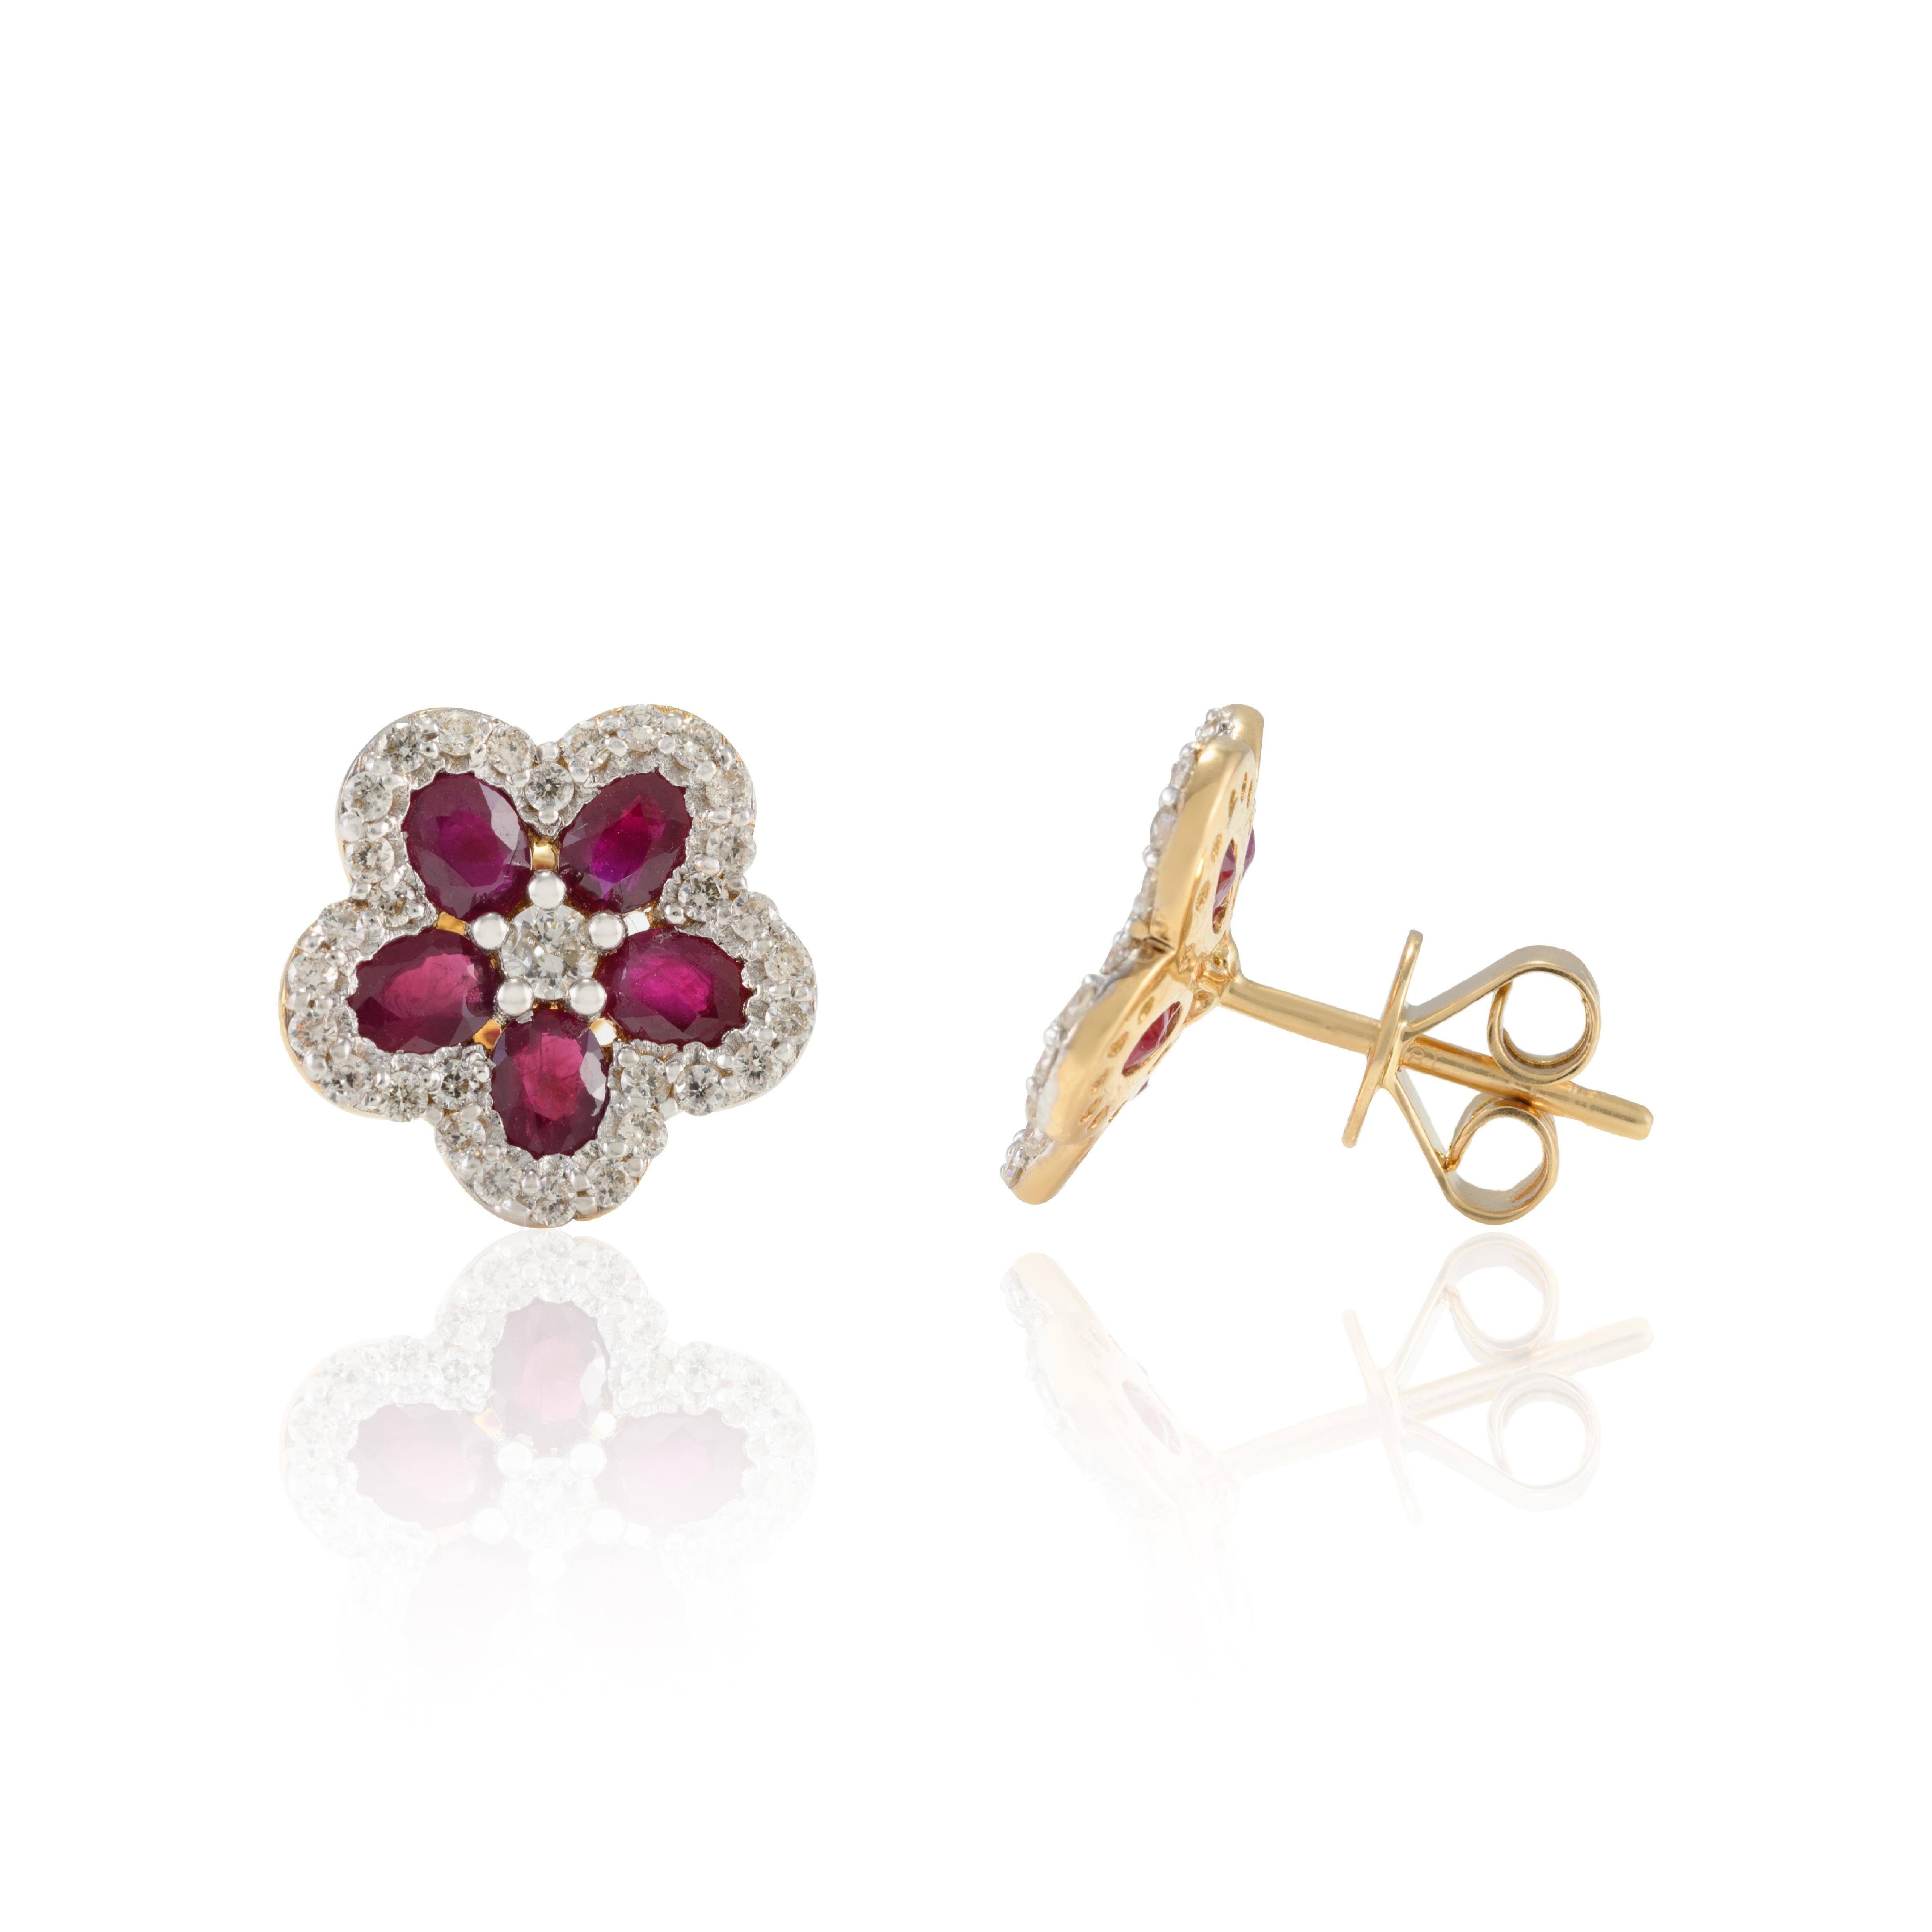 Everyday Ruby and Diamond Cherry Blossom Flower Stud Earrings in 18K Gold to make a statement with your look. You shall need stud earrings to make a statement with your look. These earrings create a sparkling, luxurious look featuring oval cut ruby